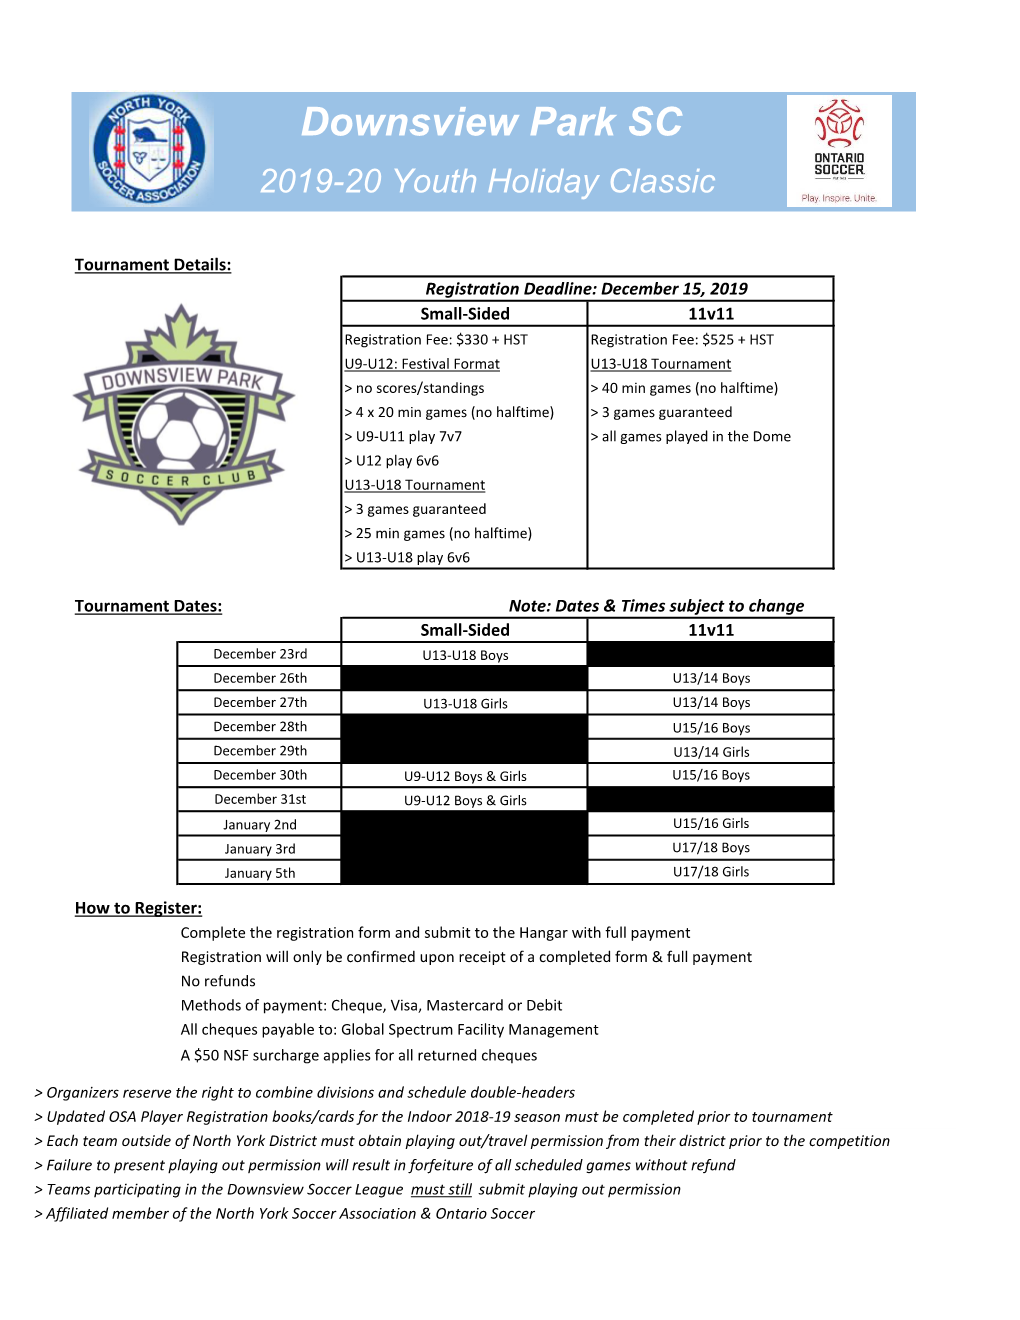 Downsview Park SC 2019-20 Youth Holiday Classic